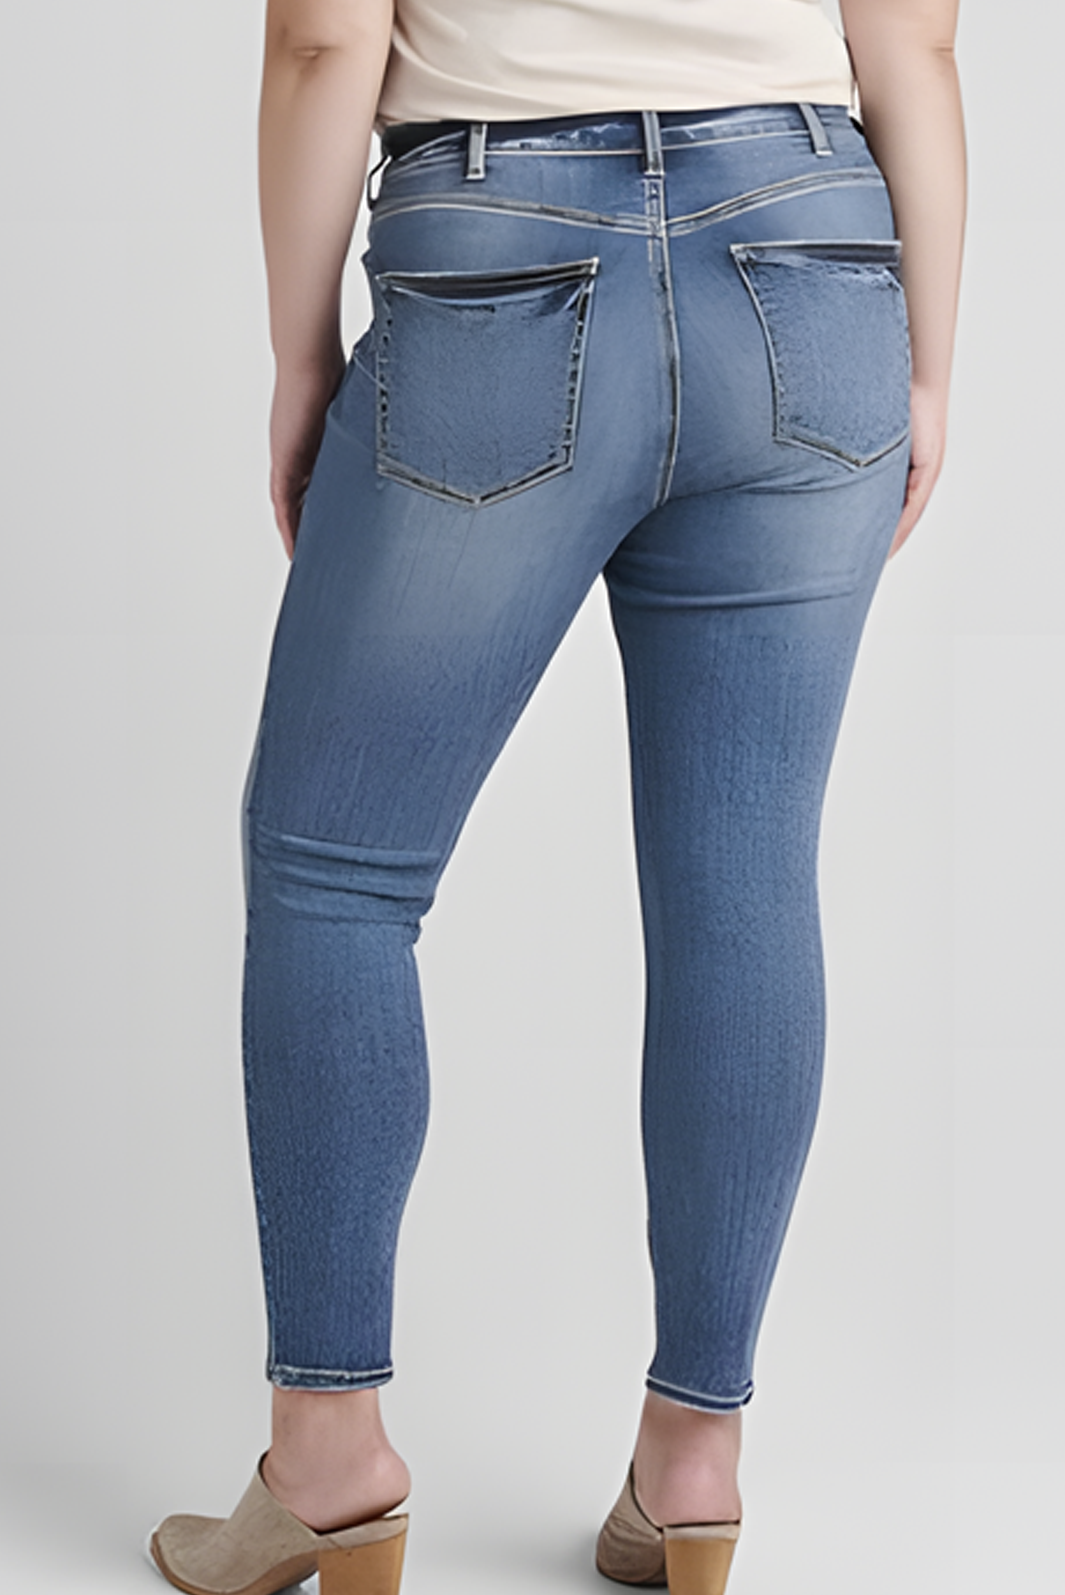 Silver Jeans Plus Size Avery Skinny Jeans